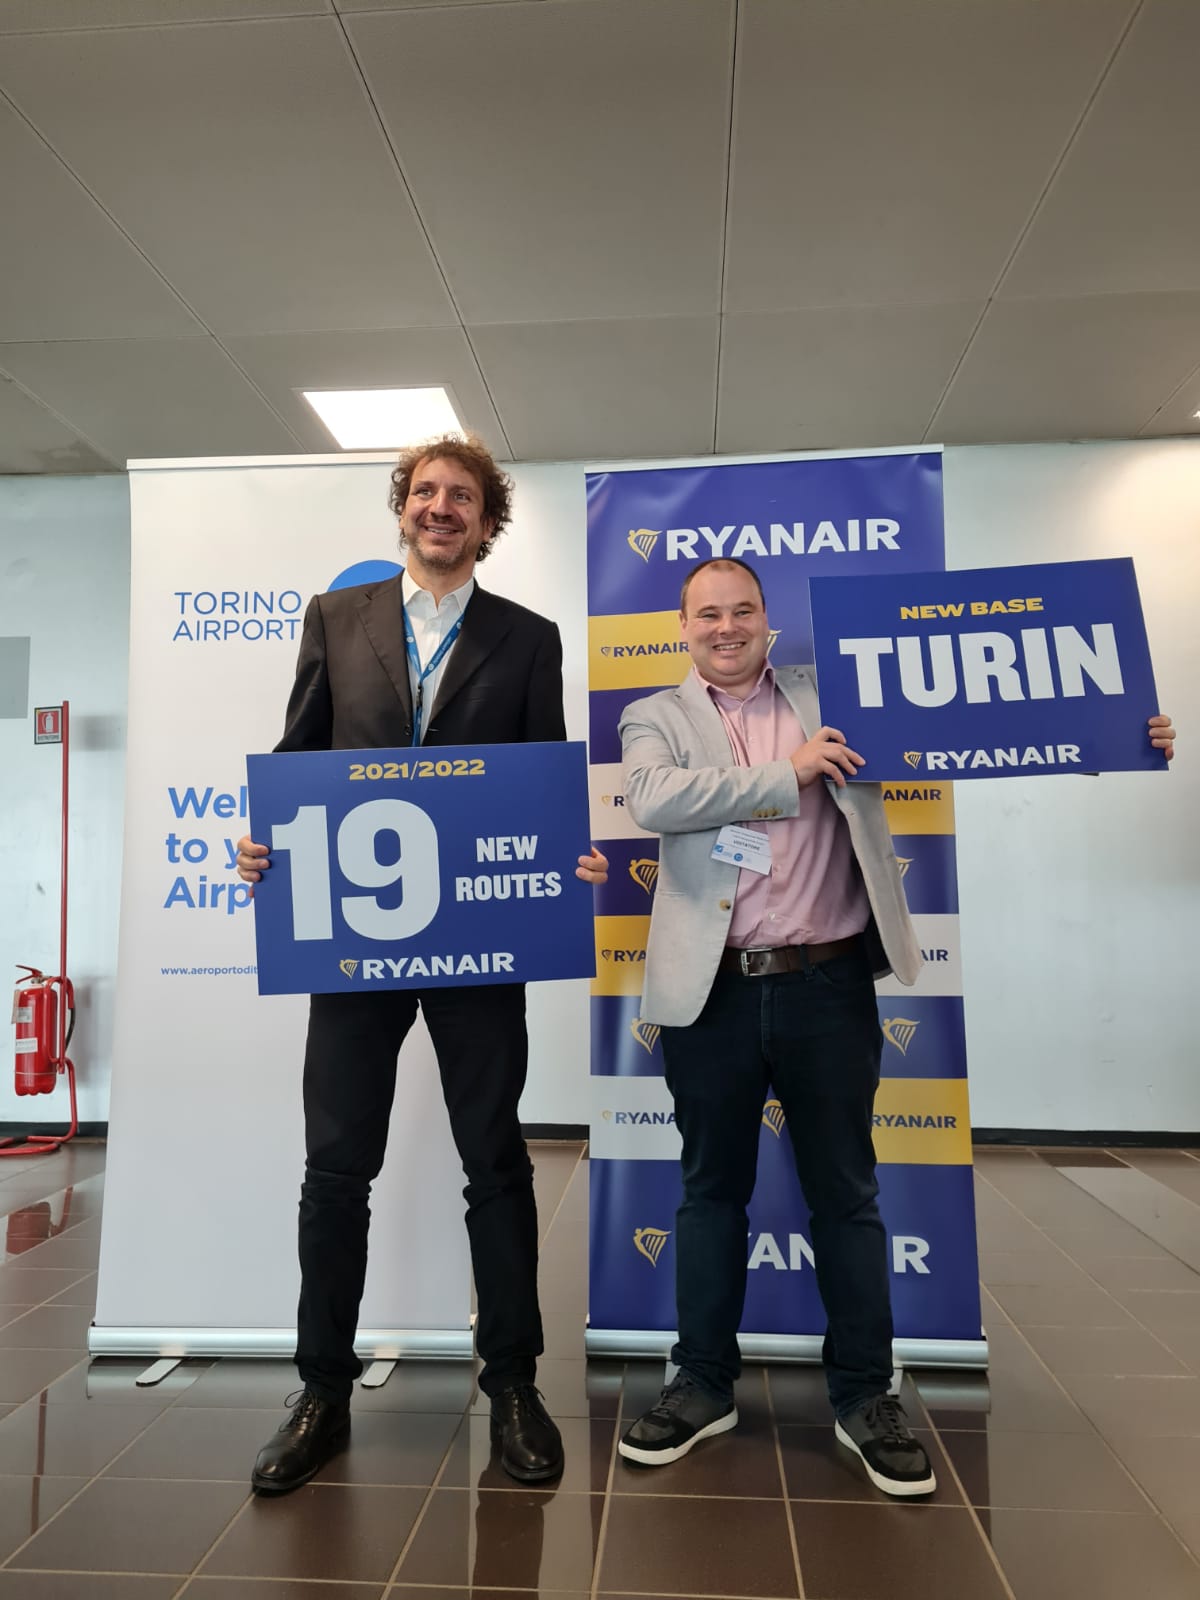 Ryanair Celebrates The Opening Of Its New Turin Base & Launches S22 Schedule